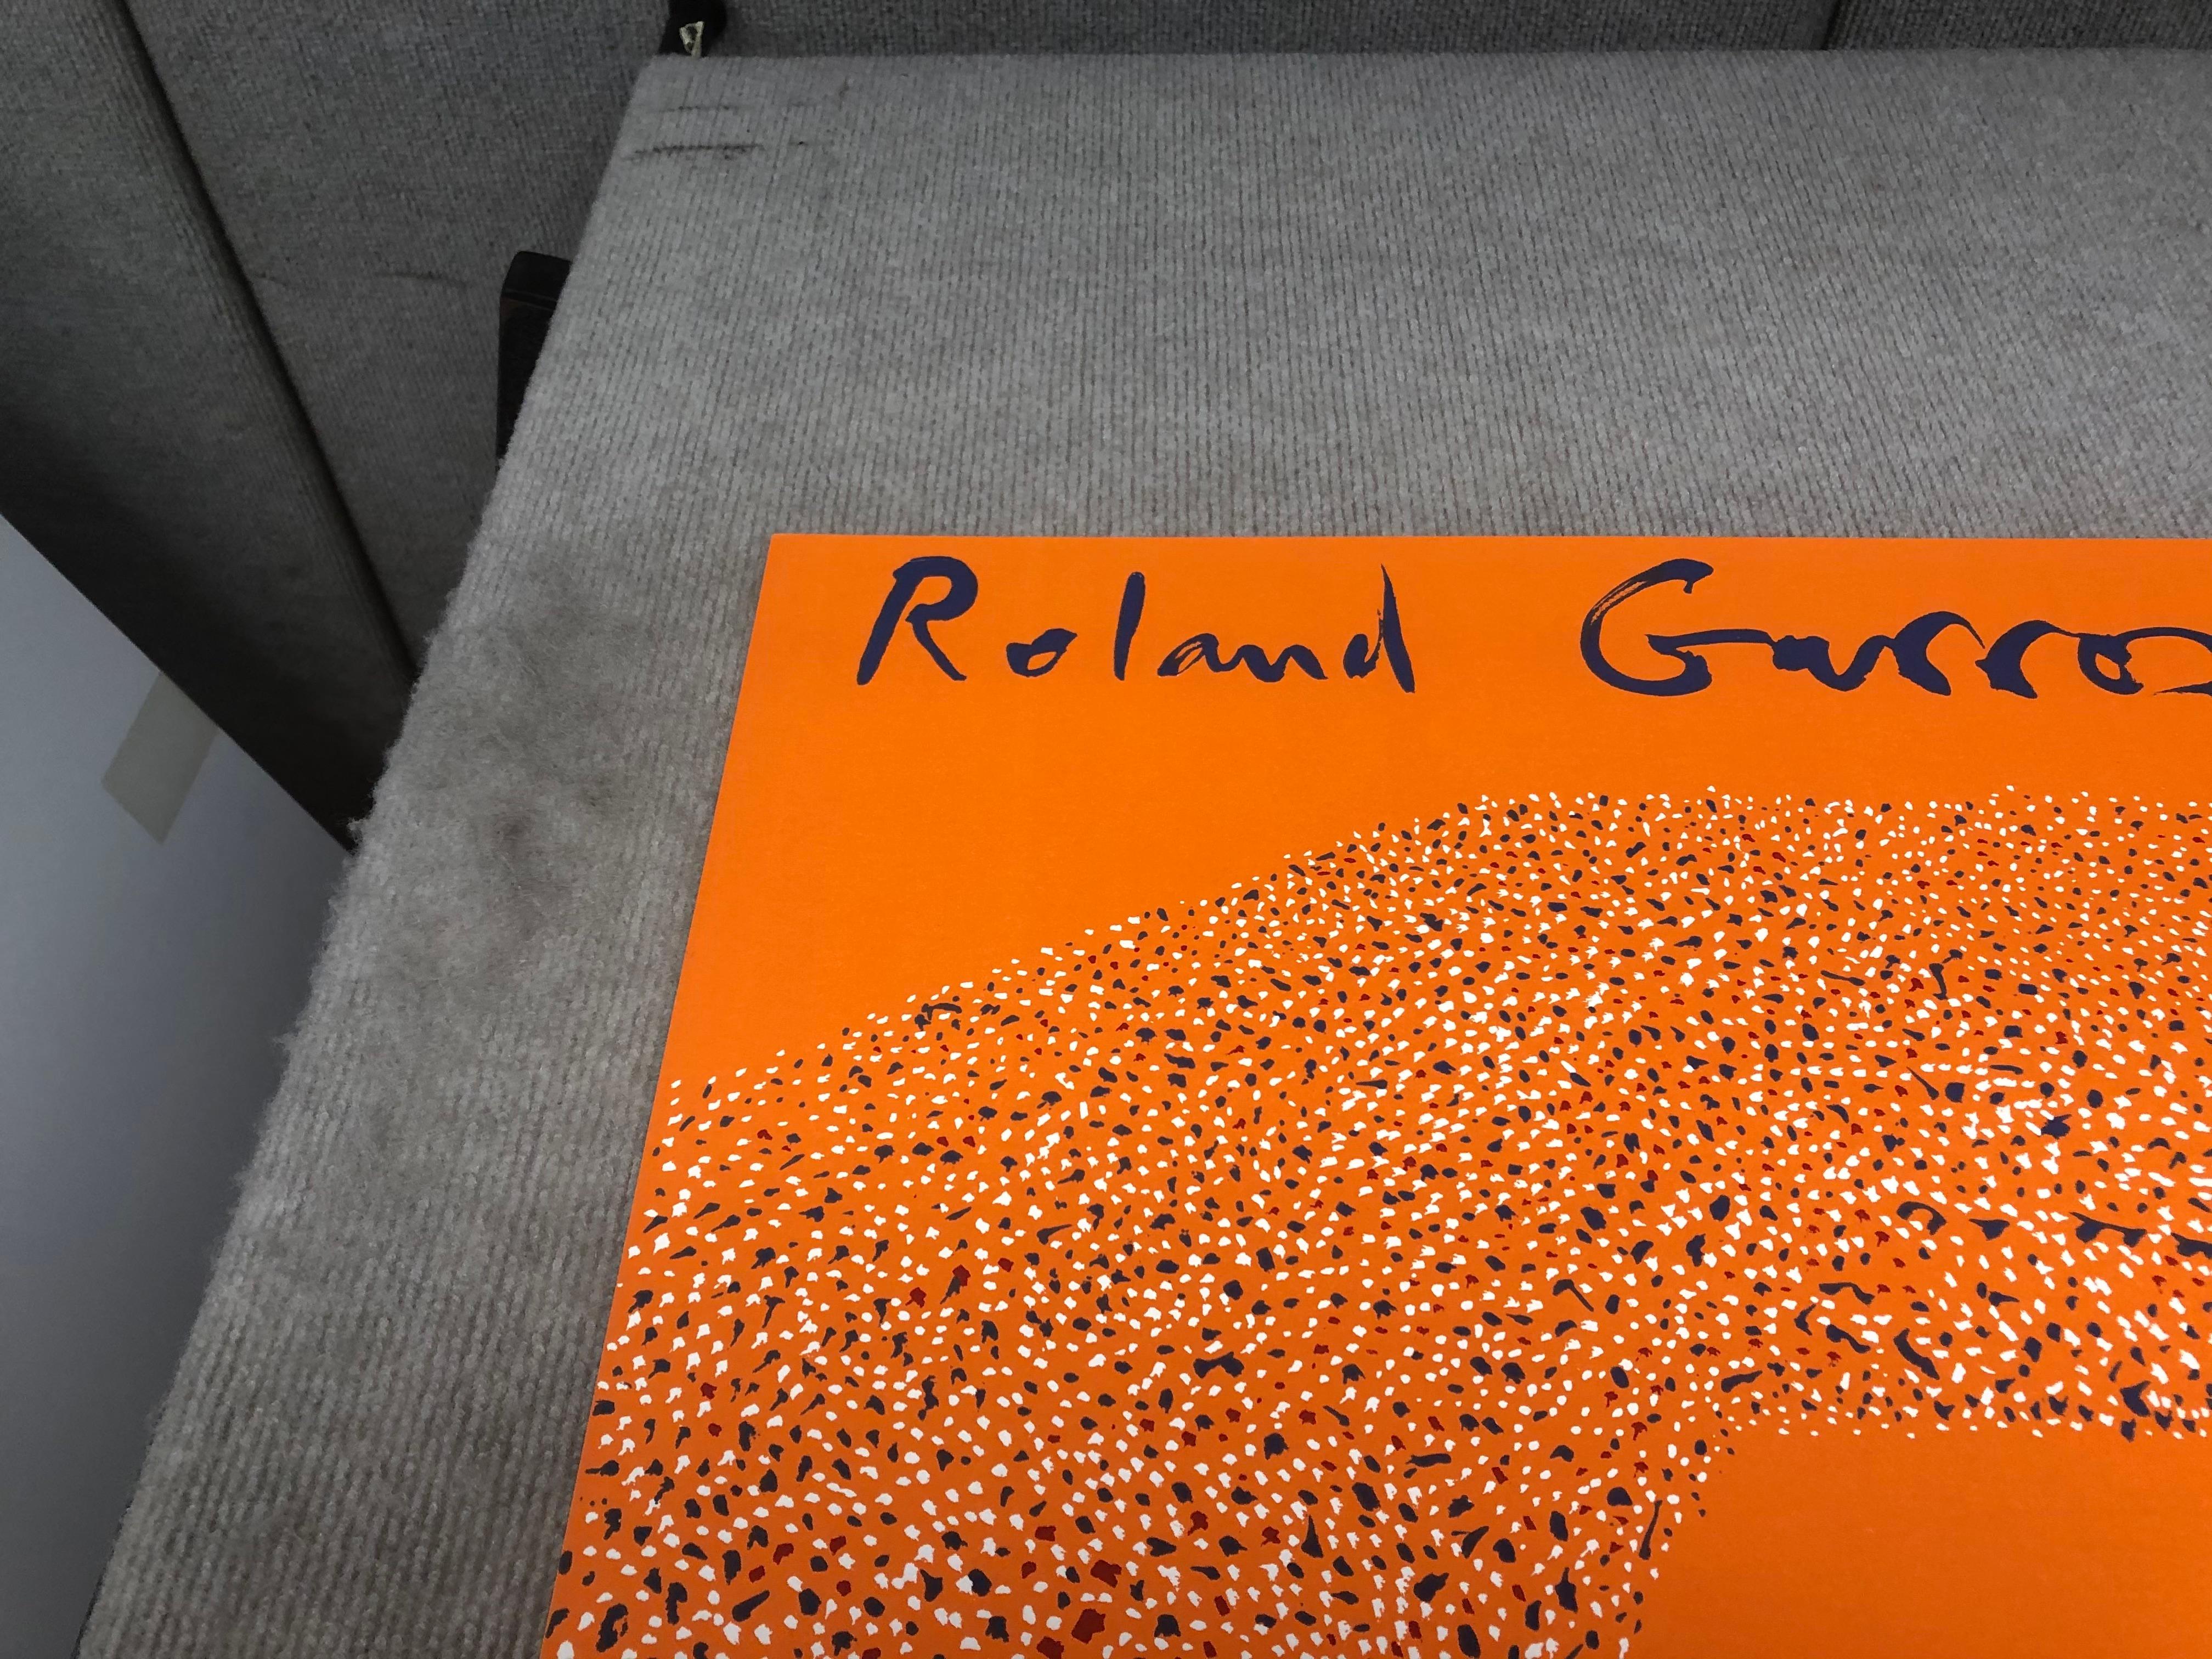 1984 Gilles Aillaud 'Roland Garros French Open' Pop Art Orange France Lithograph 7